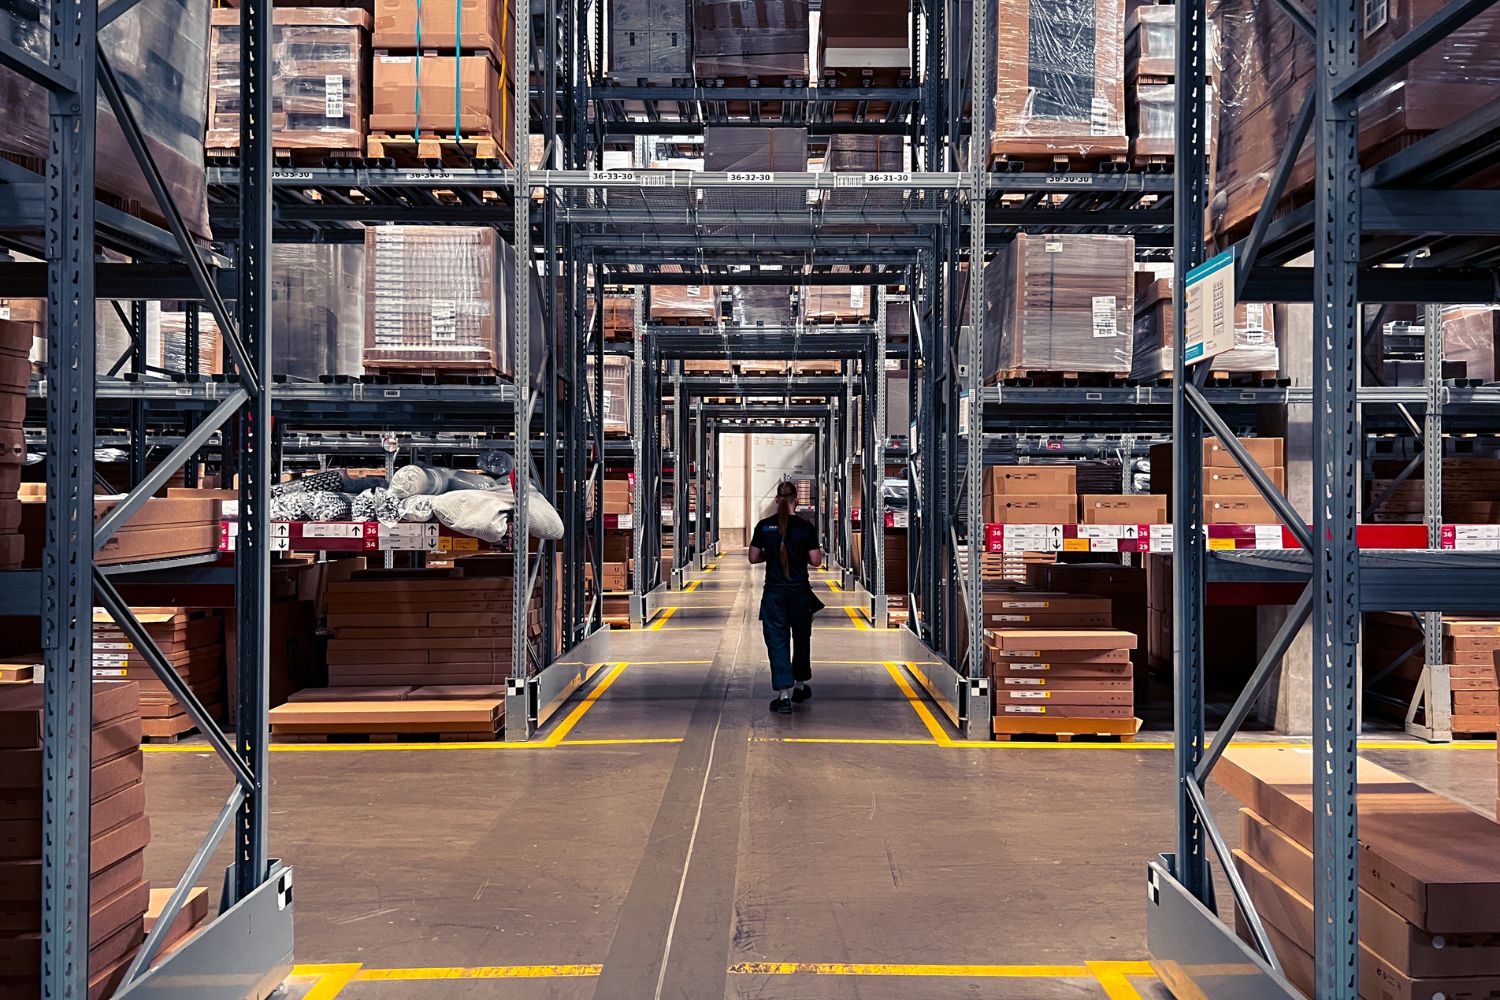  Image of a warehouse with many boxes and a worker walking down the aisle